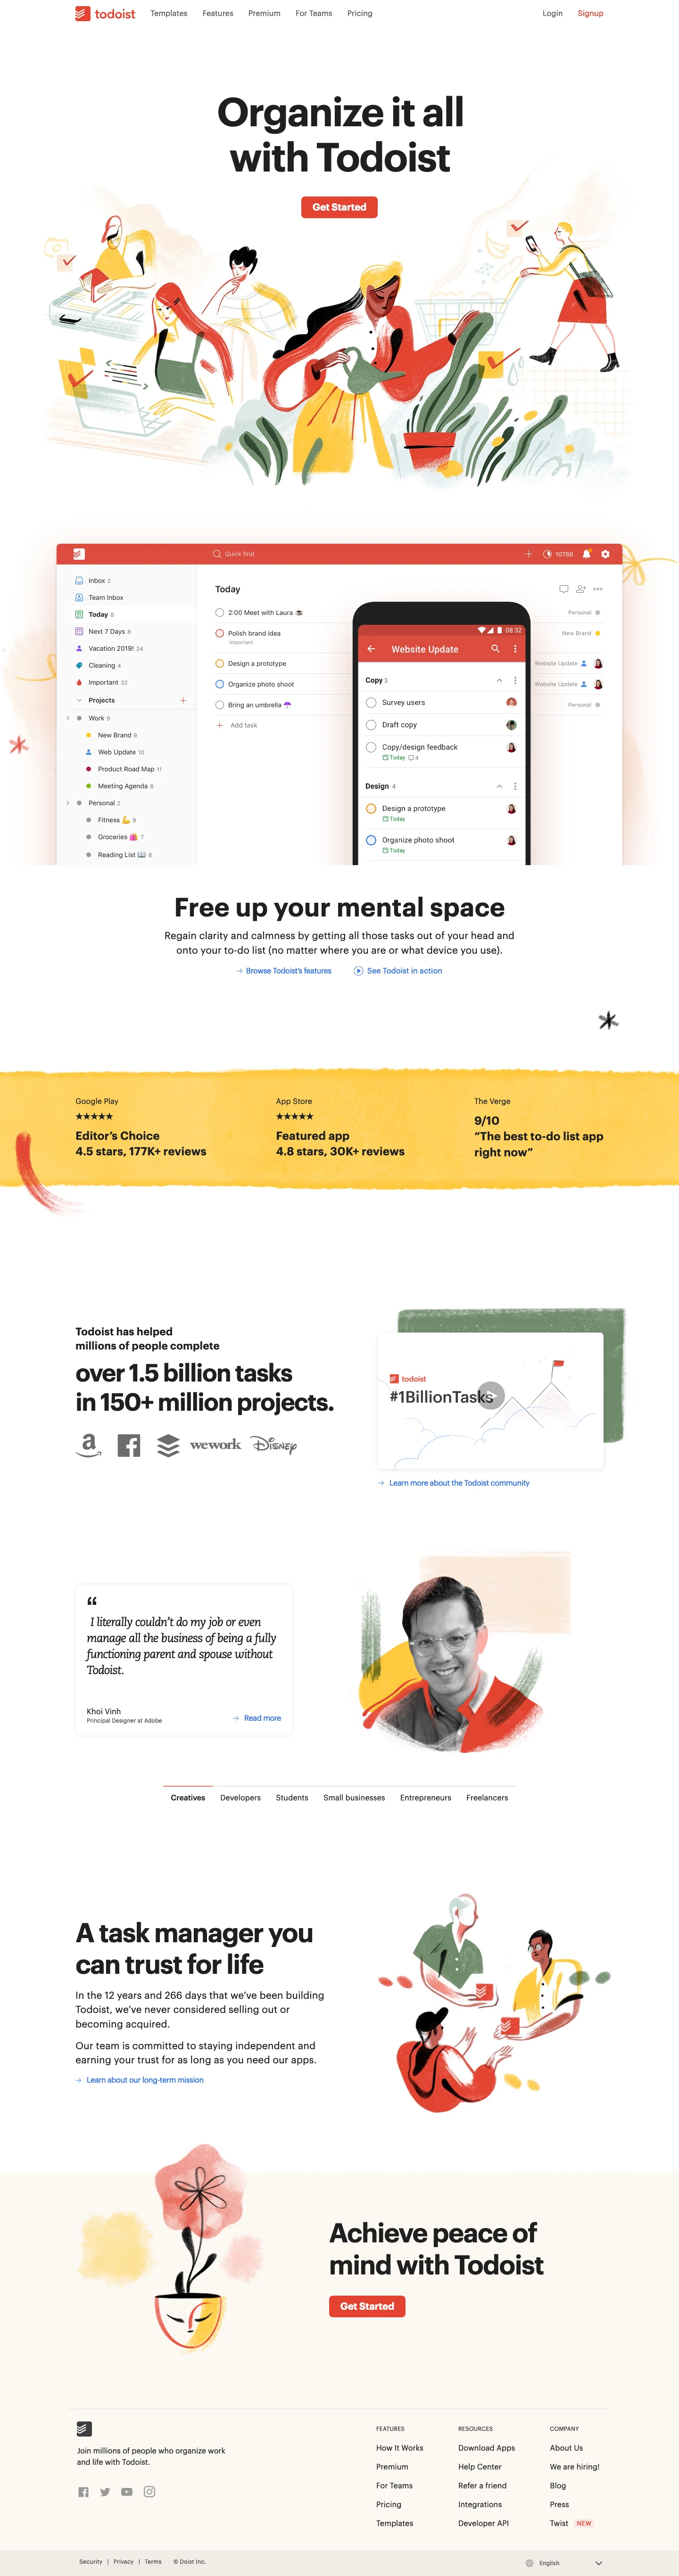 Todoist Landing Page Example: Join 20 million people and teams that organize, plan, and collaborate on tasks and projects with Todoist. "The best to-do list" by The Verge.